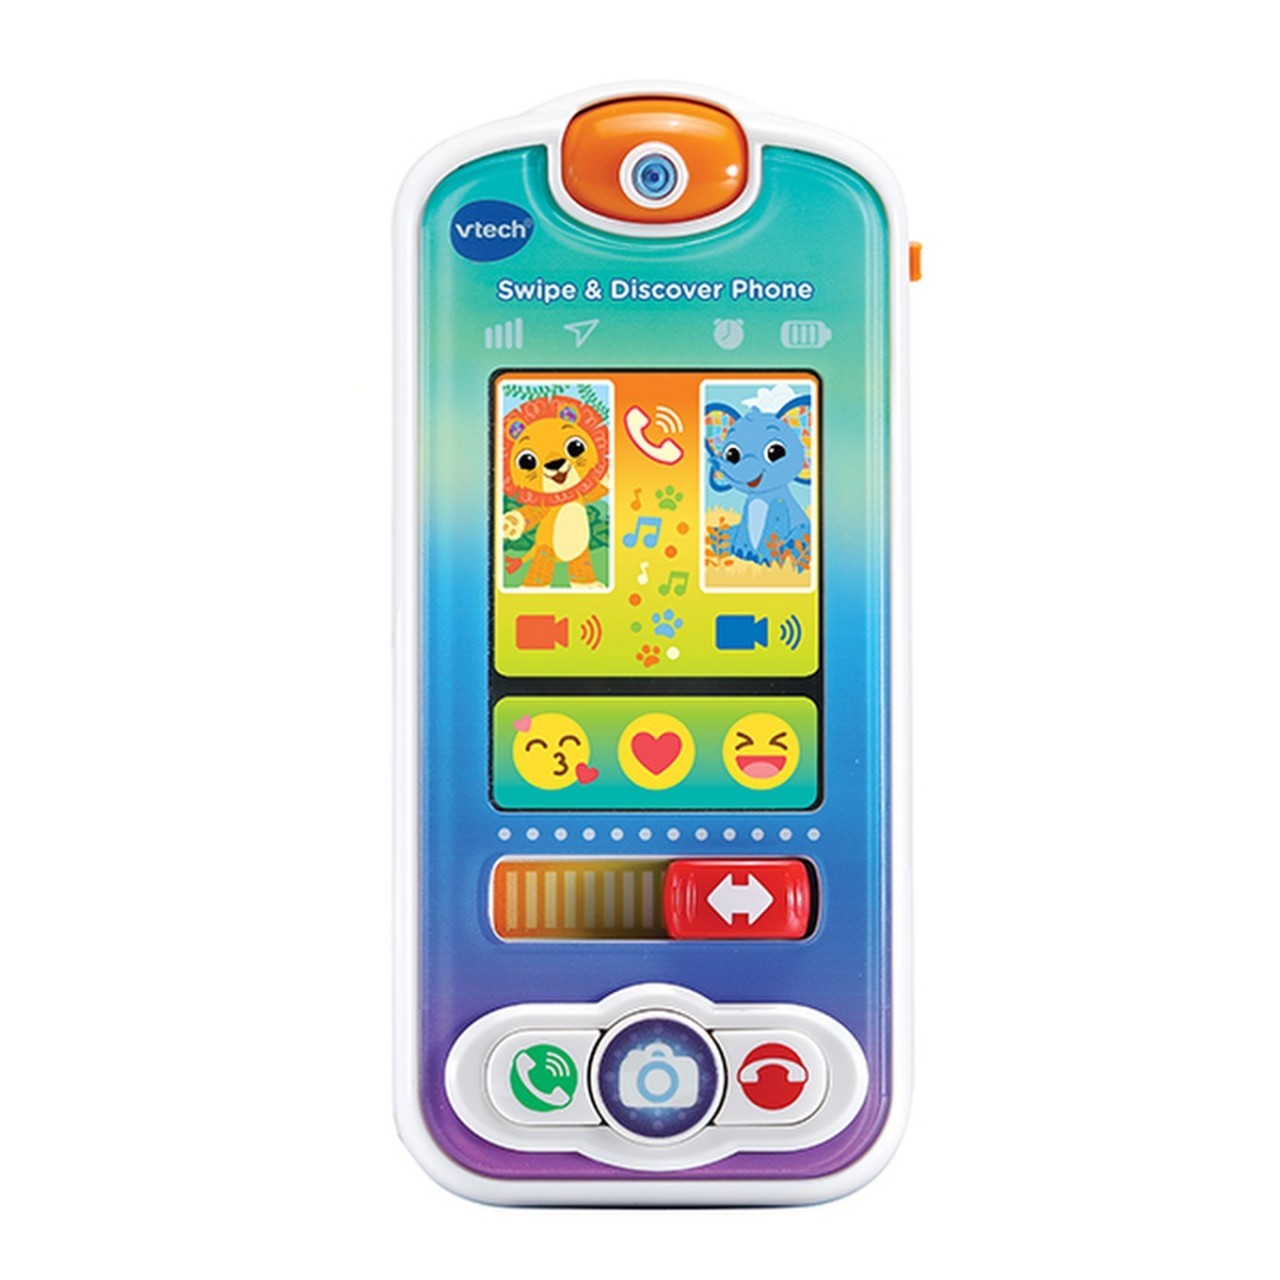 Vtech Swipe And Discover Phone, 80-537603